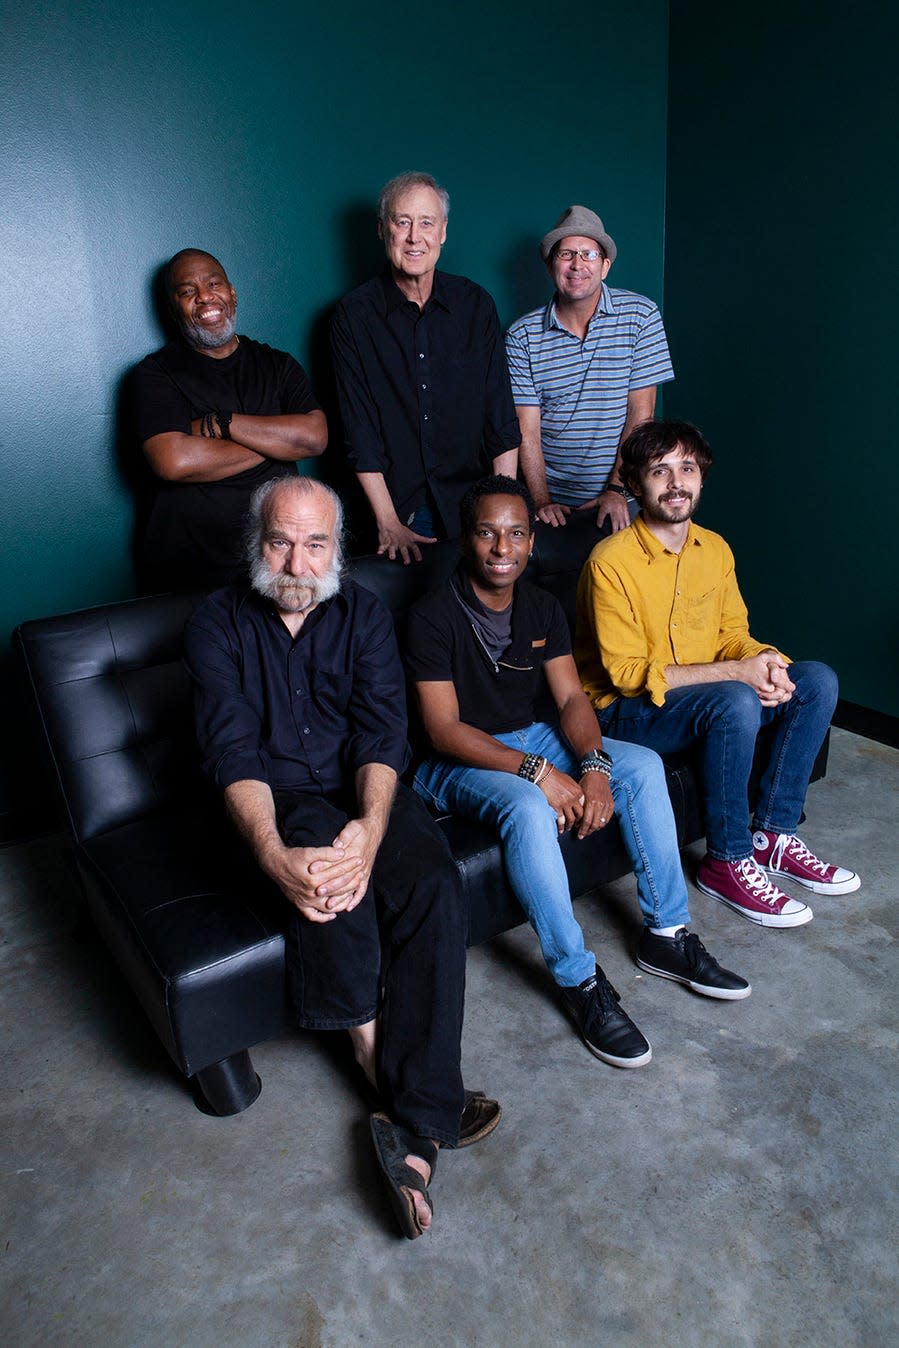 Bruce Hornsby & The Noisemakers headline the Saturday, June 18, 2022, night of the 34th Elkhart Jazz Festival with a performance at The Lerner Theatre in downtown Elkhart.